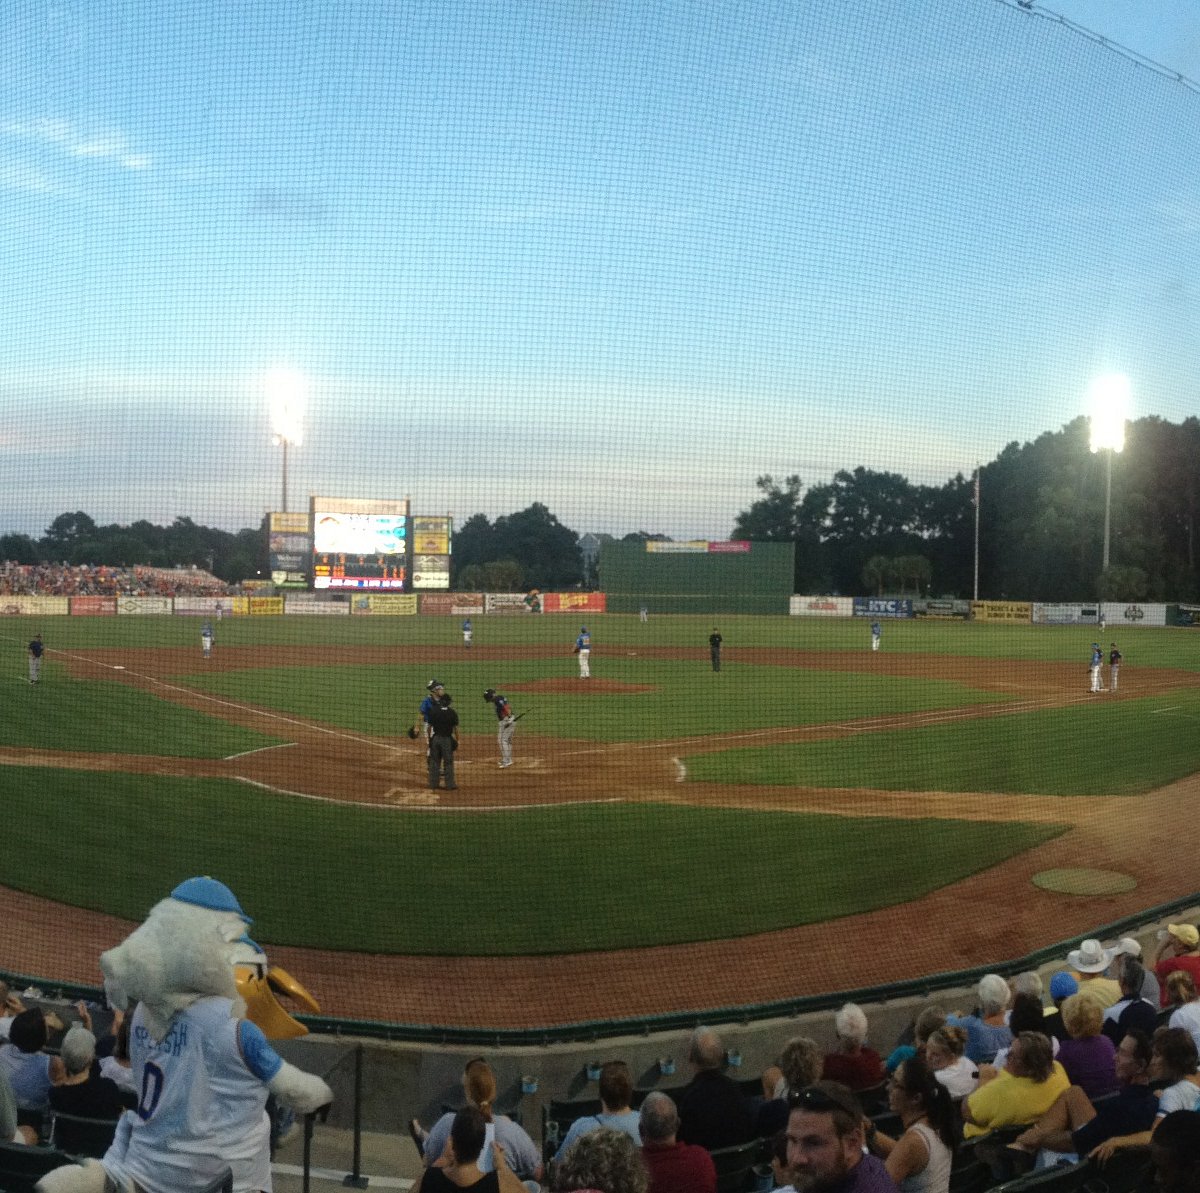 It's Opening Day for the Myrtle Beach Pelicans